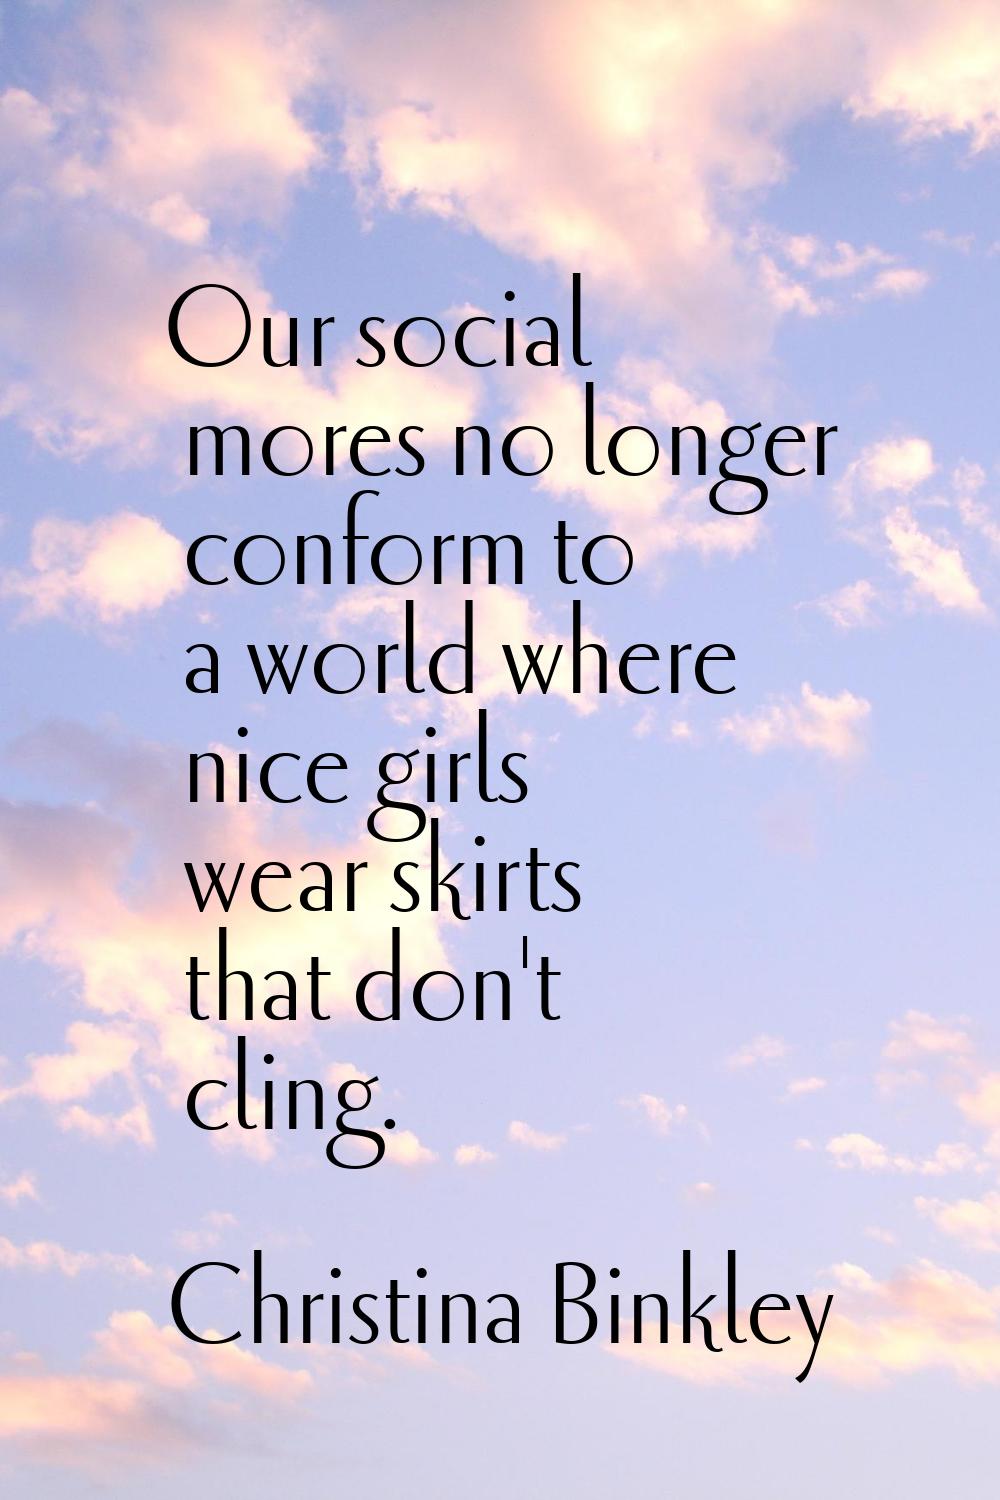 Our social mores no longer conform to a world where nice girls wear skirts that don't cling.